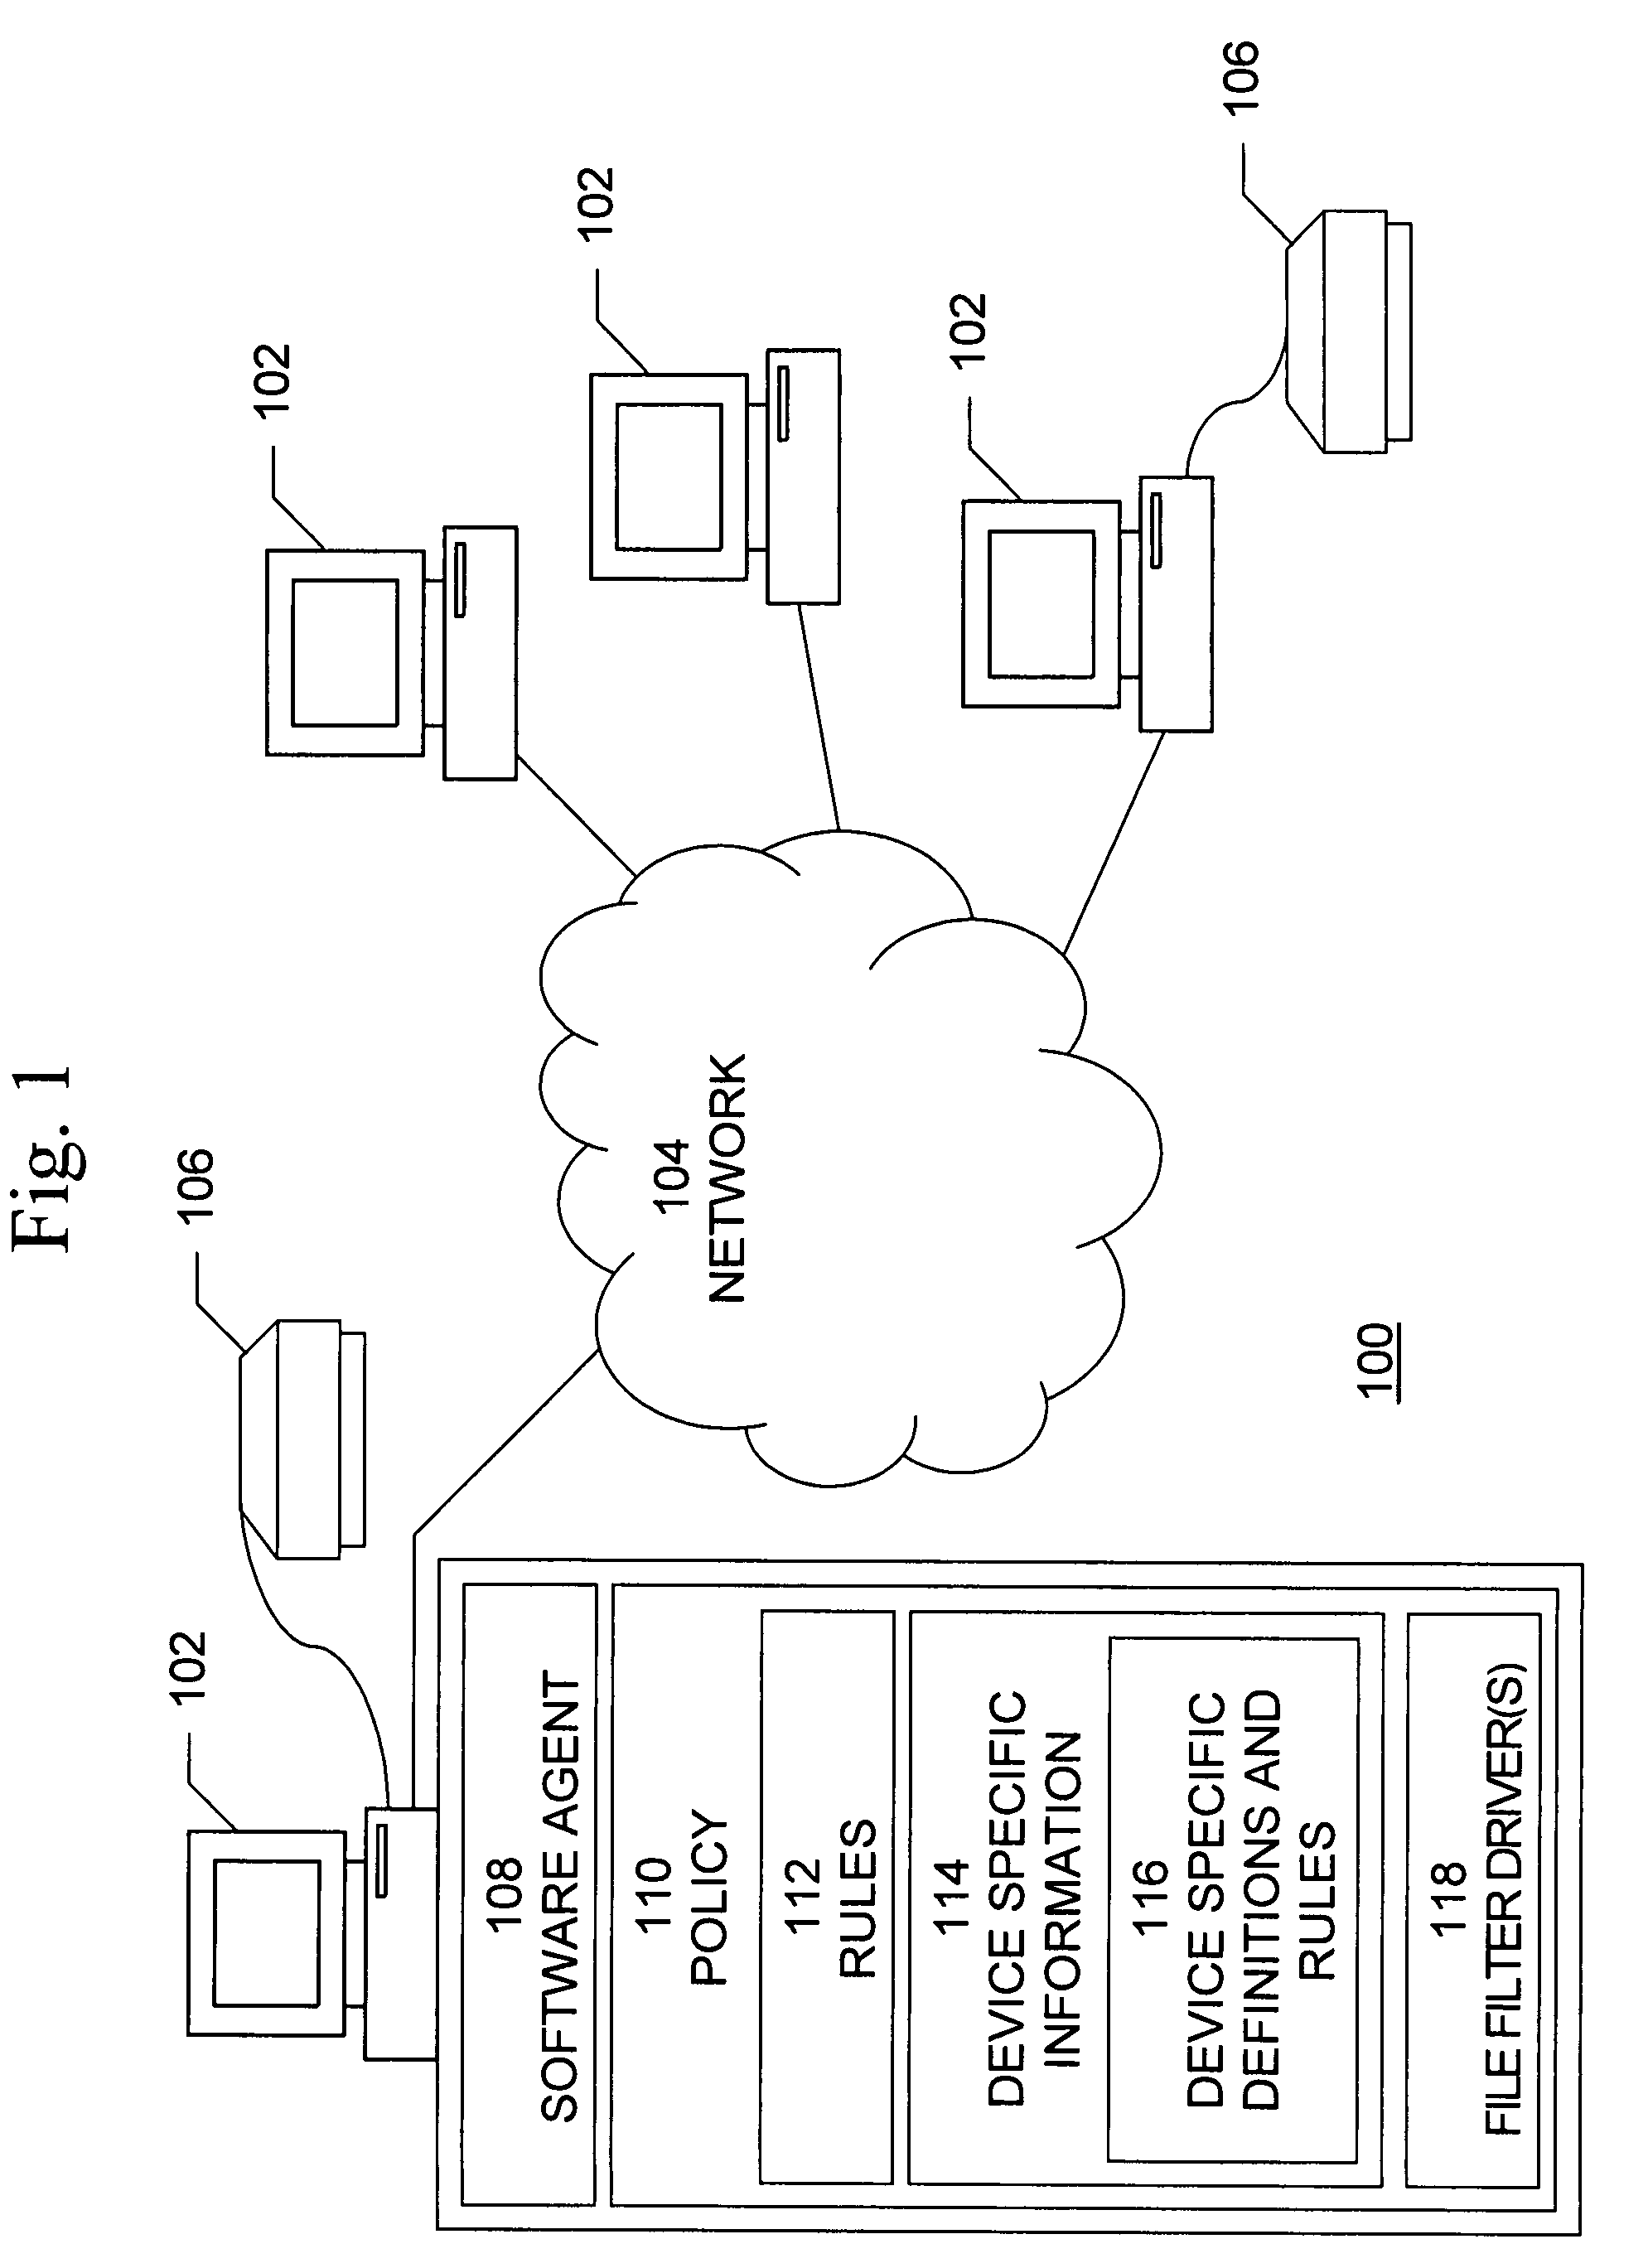 Method and system for generic real time management of devices on computers connected to a network